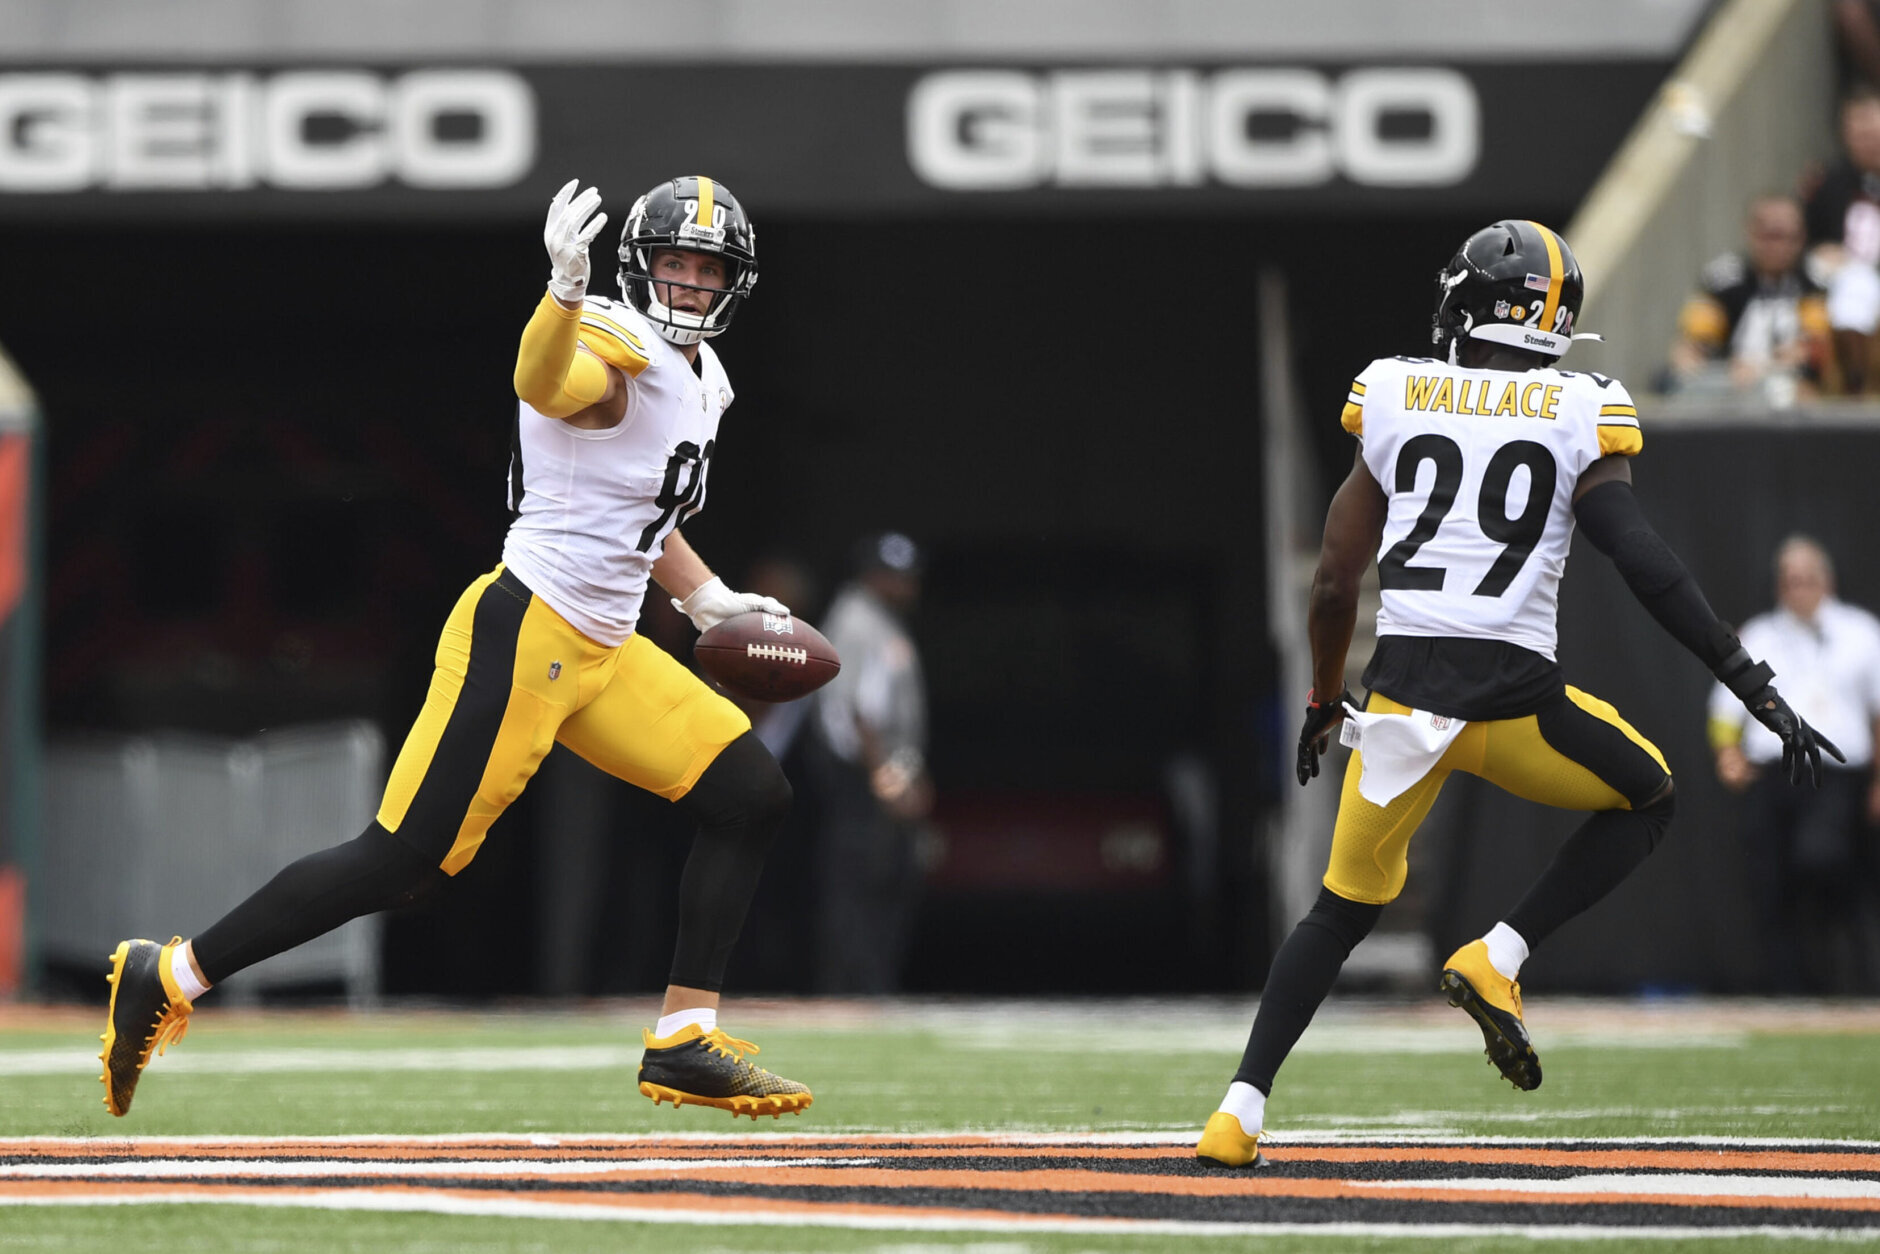 <p><b><i>Steelers 23</i></b><br />
<b><i>Bengals 20 (OT)</i></b></p>
<p>This was a wild (<a href="https://wtop.com/nfl/2022/09/steelers-watt-leaves-game-vs-bengals-with-pectoral-injury/" target="_blank" rel="noopener">and pyrrhic</a>) victory for Pittsburgh but it&#8217;s also a reminder that Mike Tomlin&#8217;s Steelers are not to be underestimated.</p>
<p>But also, let&#8217;s be real — Cincinnati gagged this one away to clinch the first year in the 21st century in which the two Super Bowl teams from the previous year each lost their season opener. Super Bowl hangovers are real.</p>
